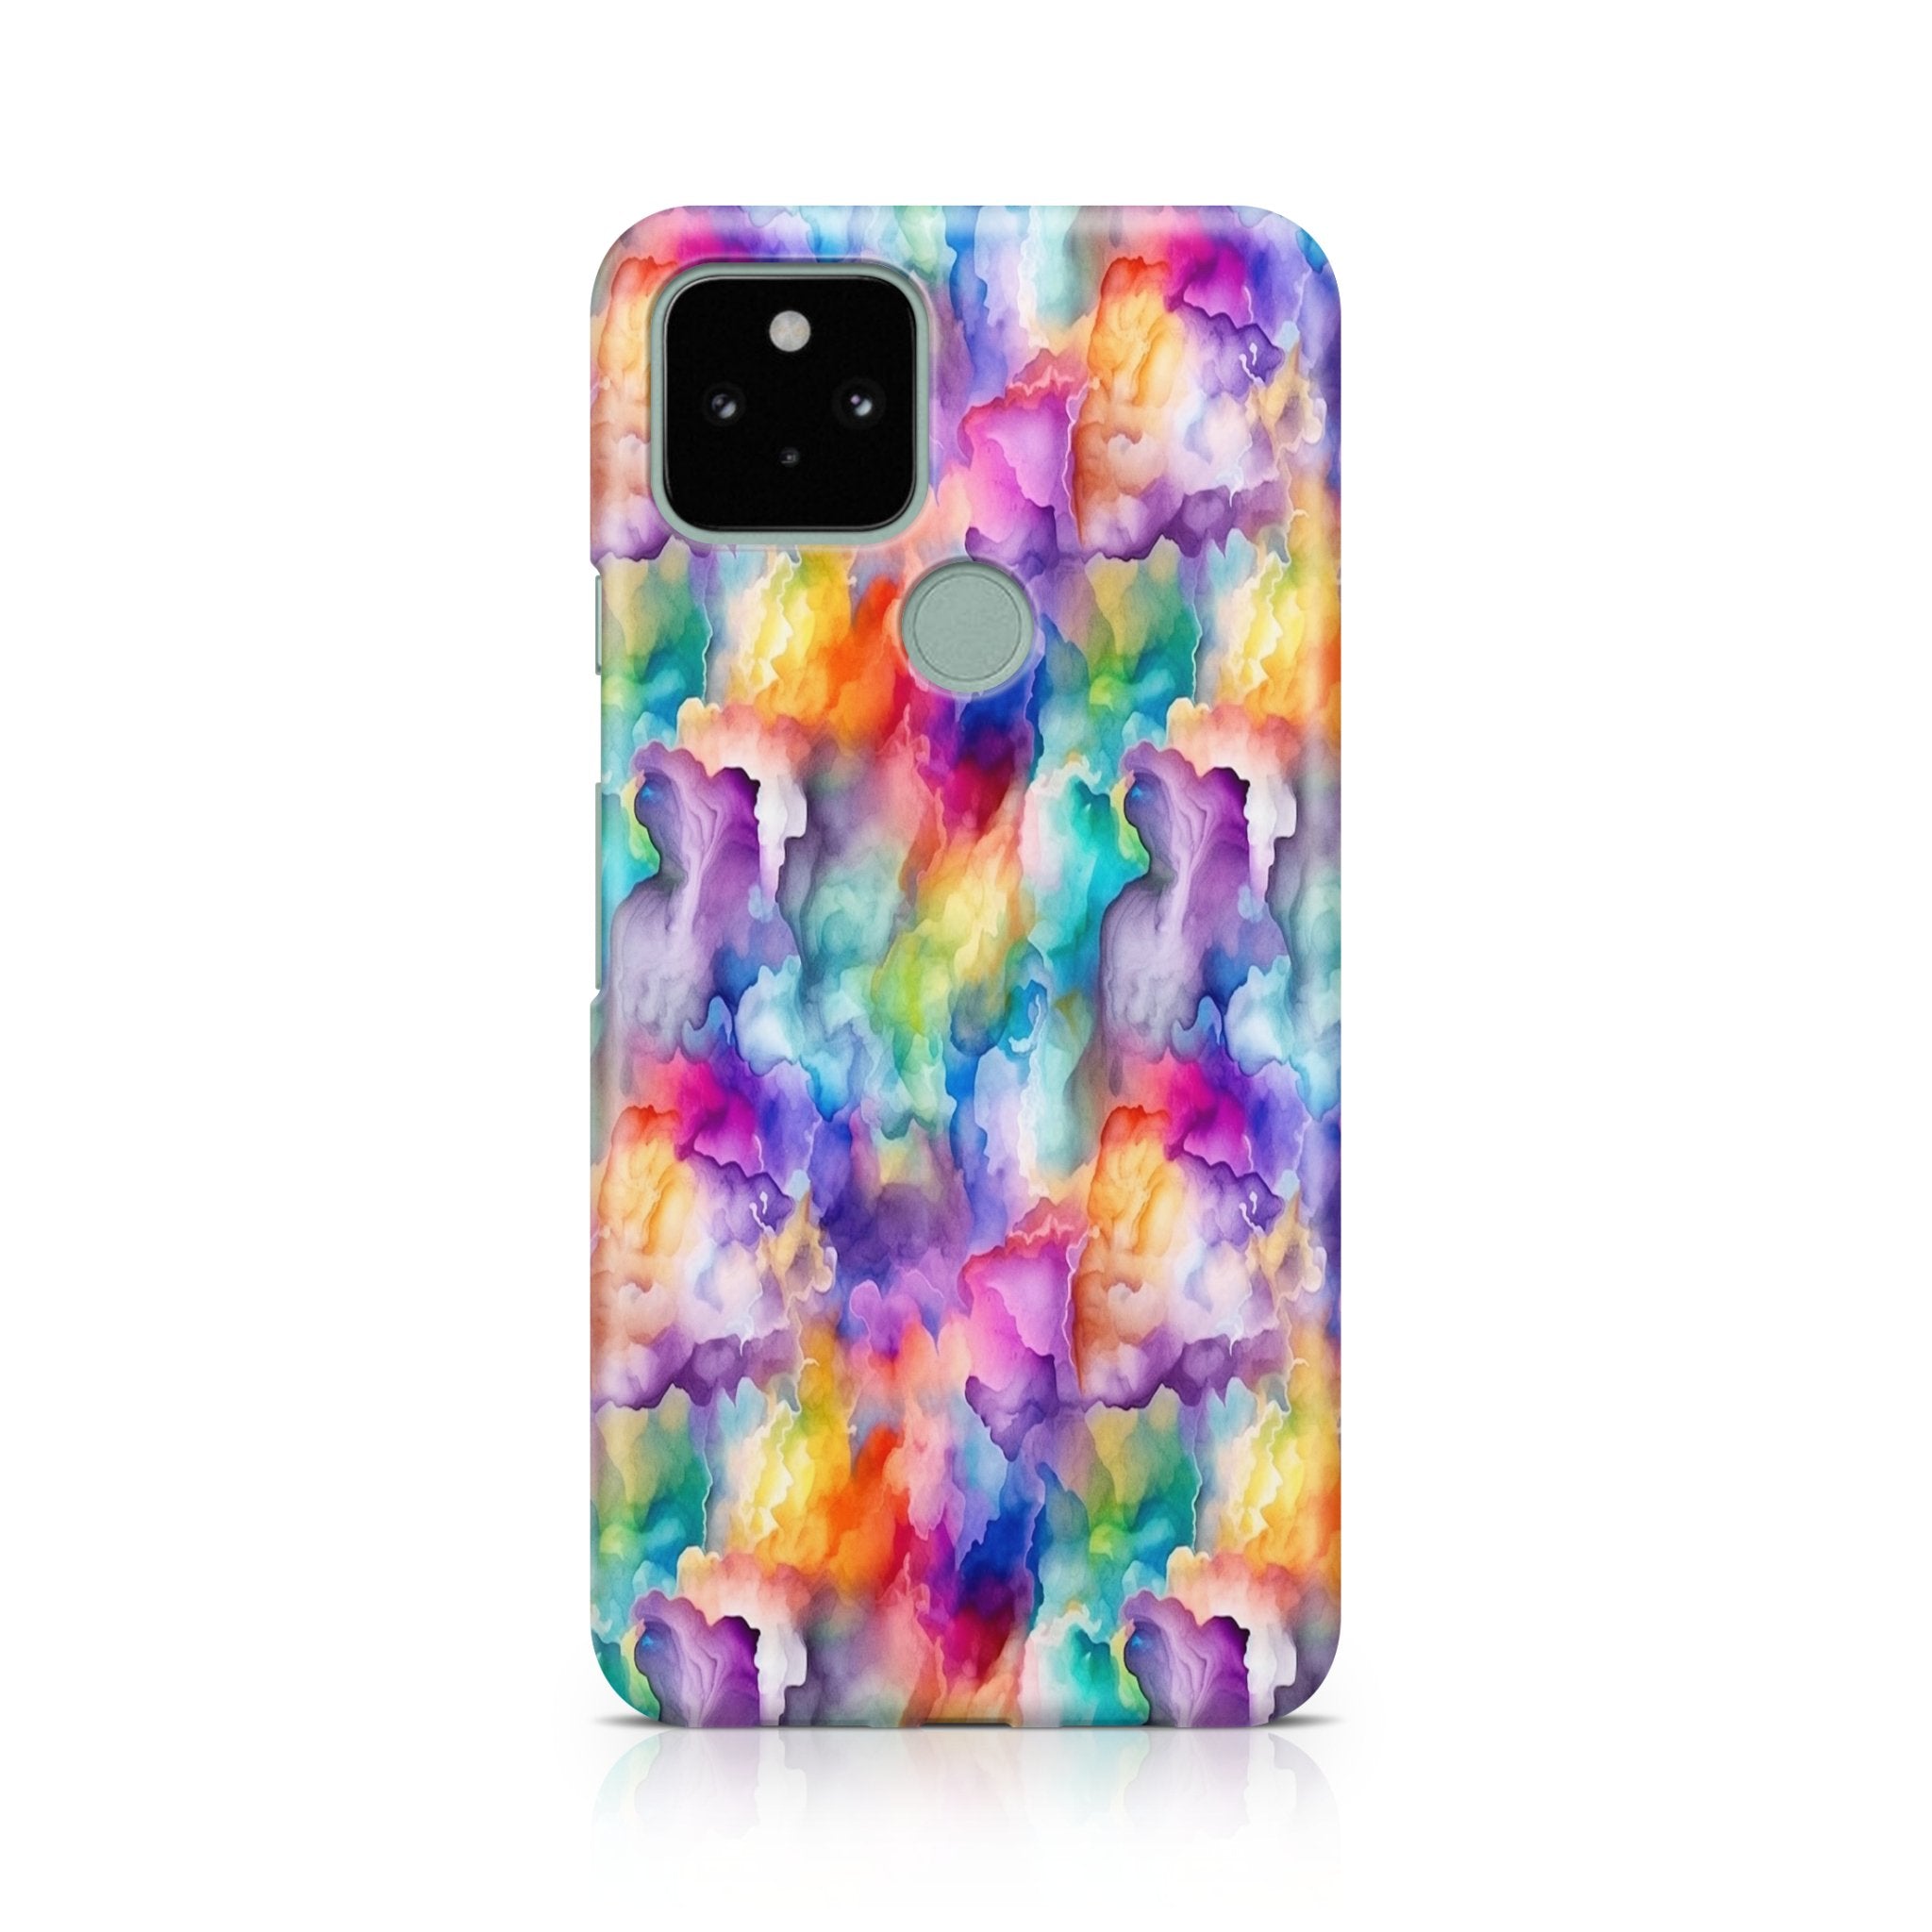 Chromatic Nimbus - Google phone case designs by CaseSwagger